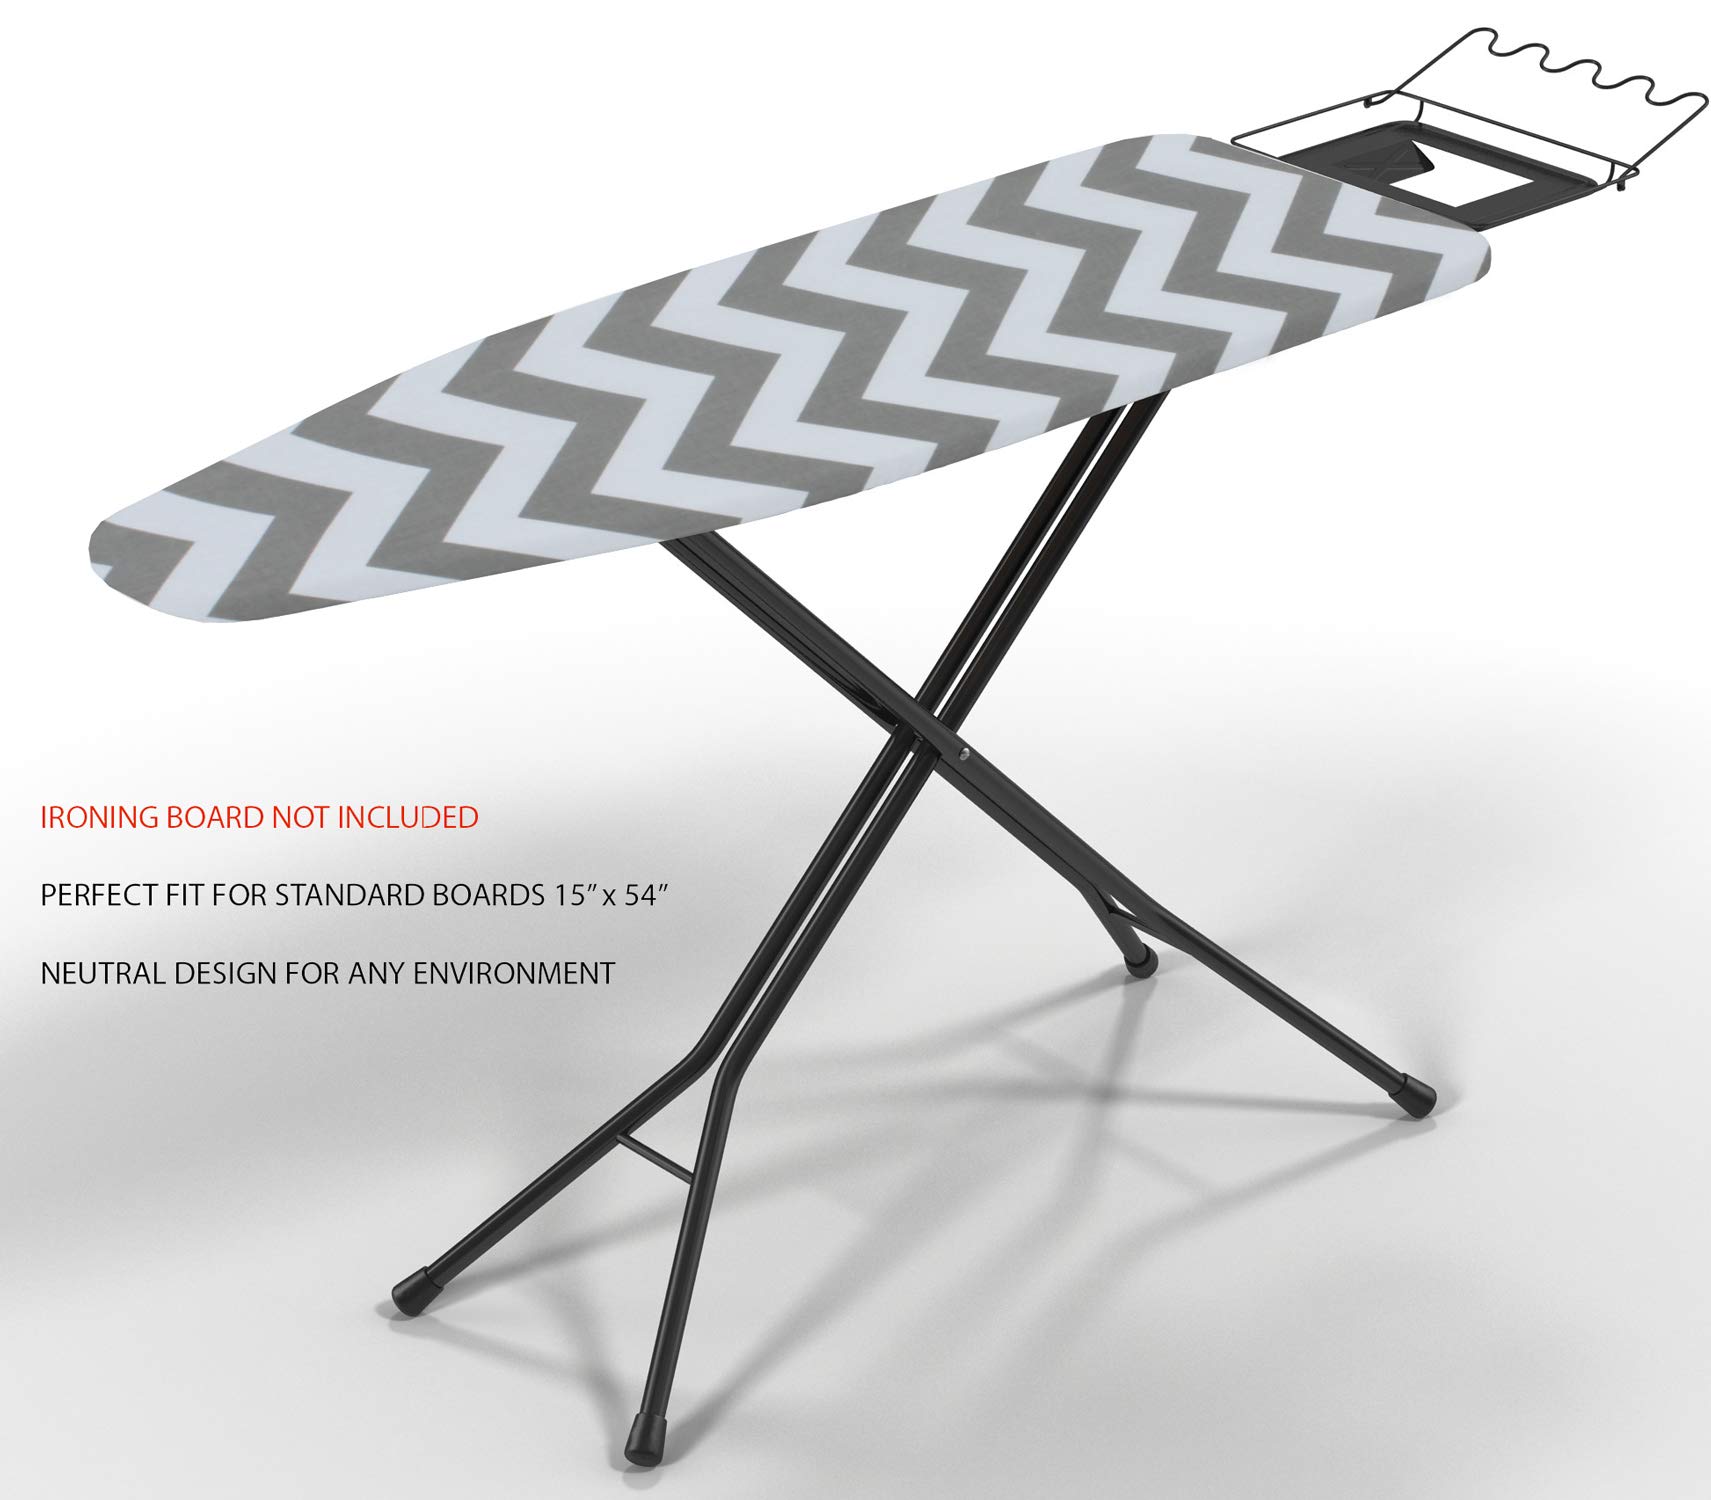 Balffor Balffor Ironing Board Cover And Pad Standard Size Silicone Coated - Scorch Proof Trifusion Iron Board Cover With Bonus Adjustable Fasteners And Protective Mesh (White And Grey, 15" X 54") Hom - image 2 of 7